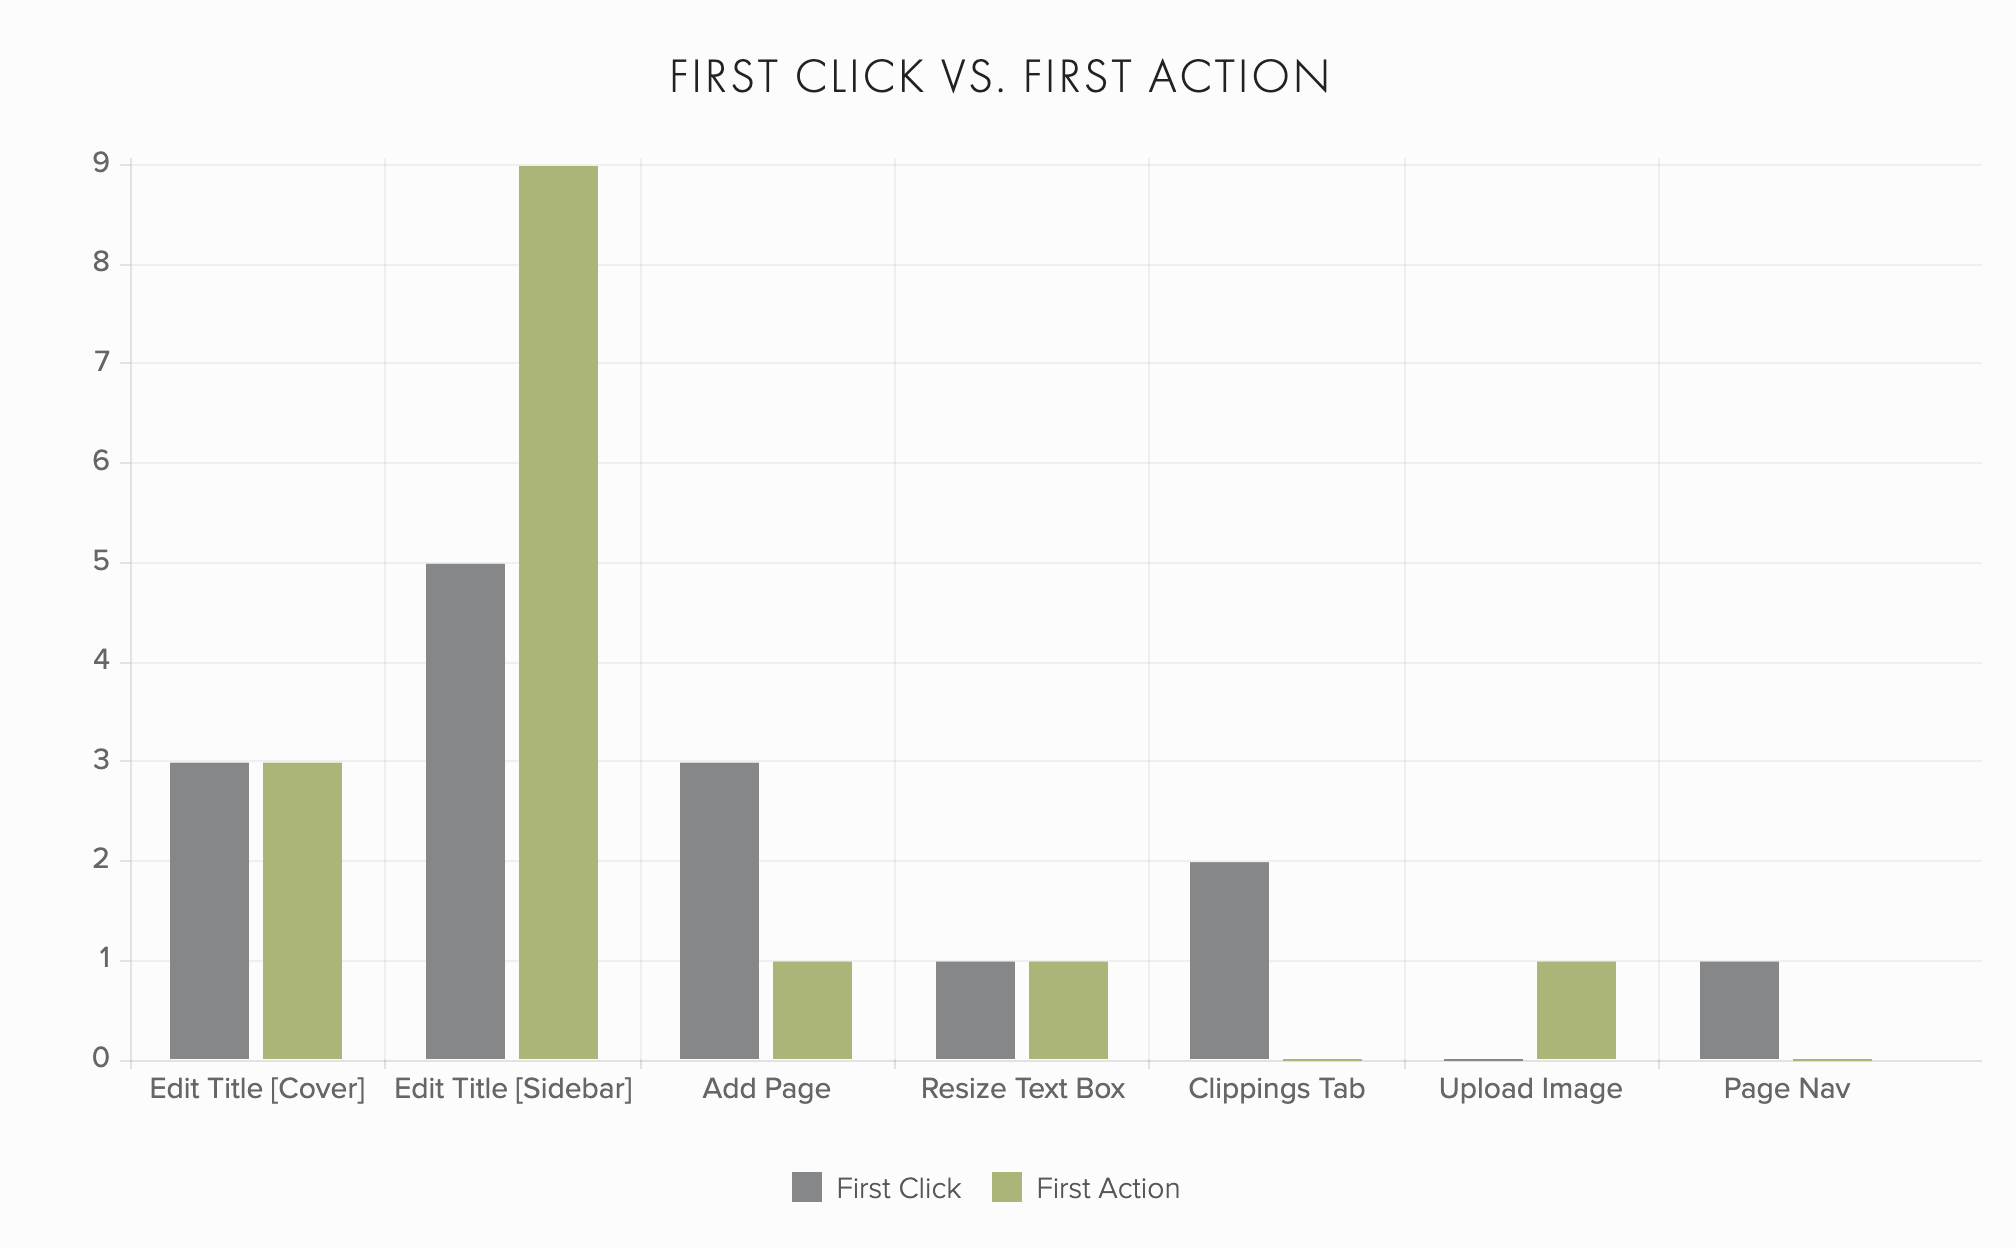 A chart showing first click vs. first action results